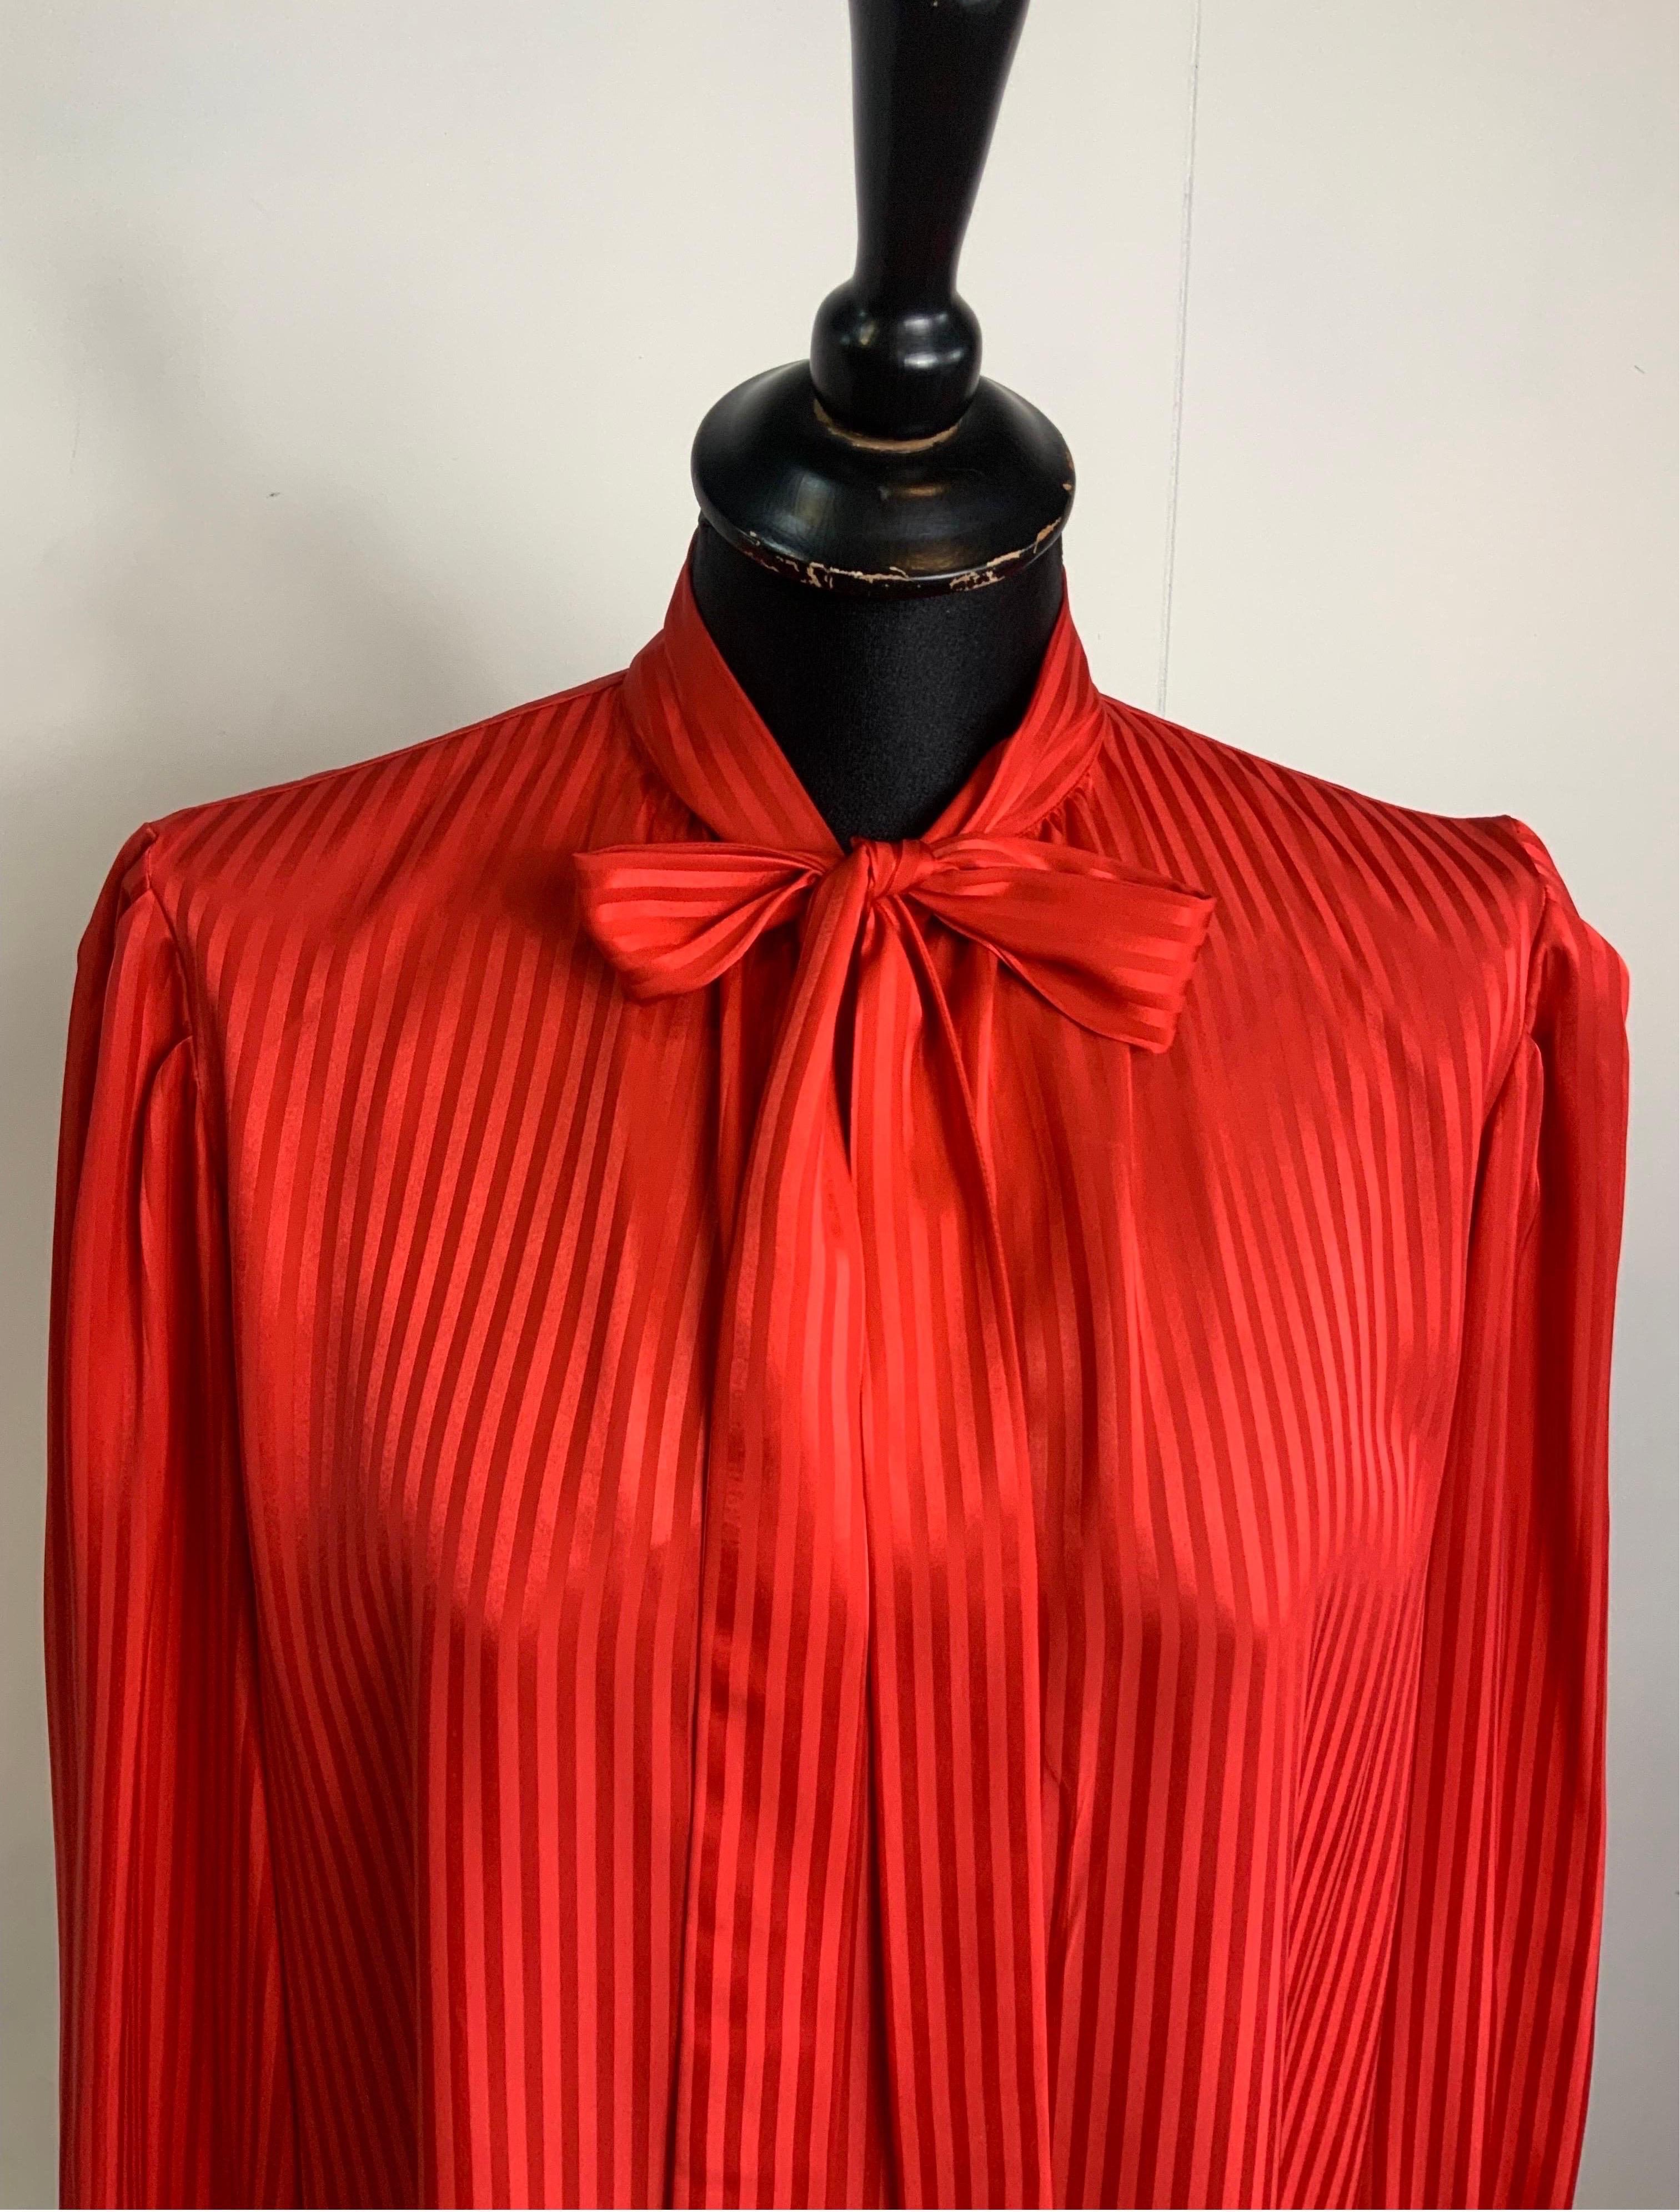 Yves Saint Laurent Variation Vintage shirt.
Bright red colour, striped pattern.
Composition label missing but we think it is silk blend.
Size 38 French.
Shoulders 40 cm
Bust 52 cm
Length 72 cm
Sleeve 64 cm
Excellent general condition, shows signs of